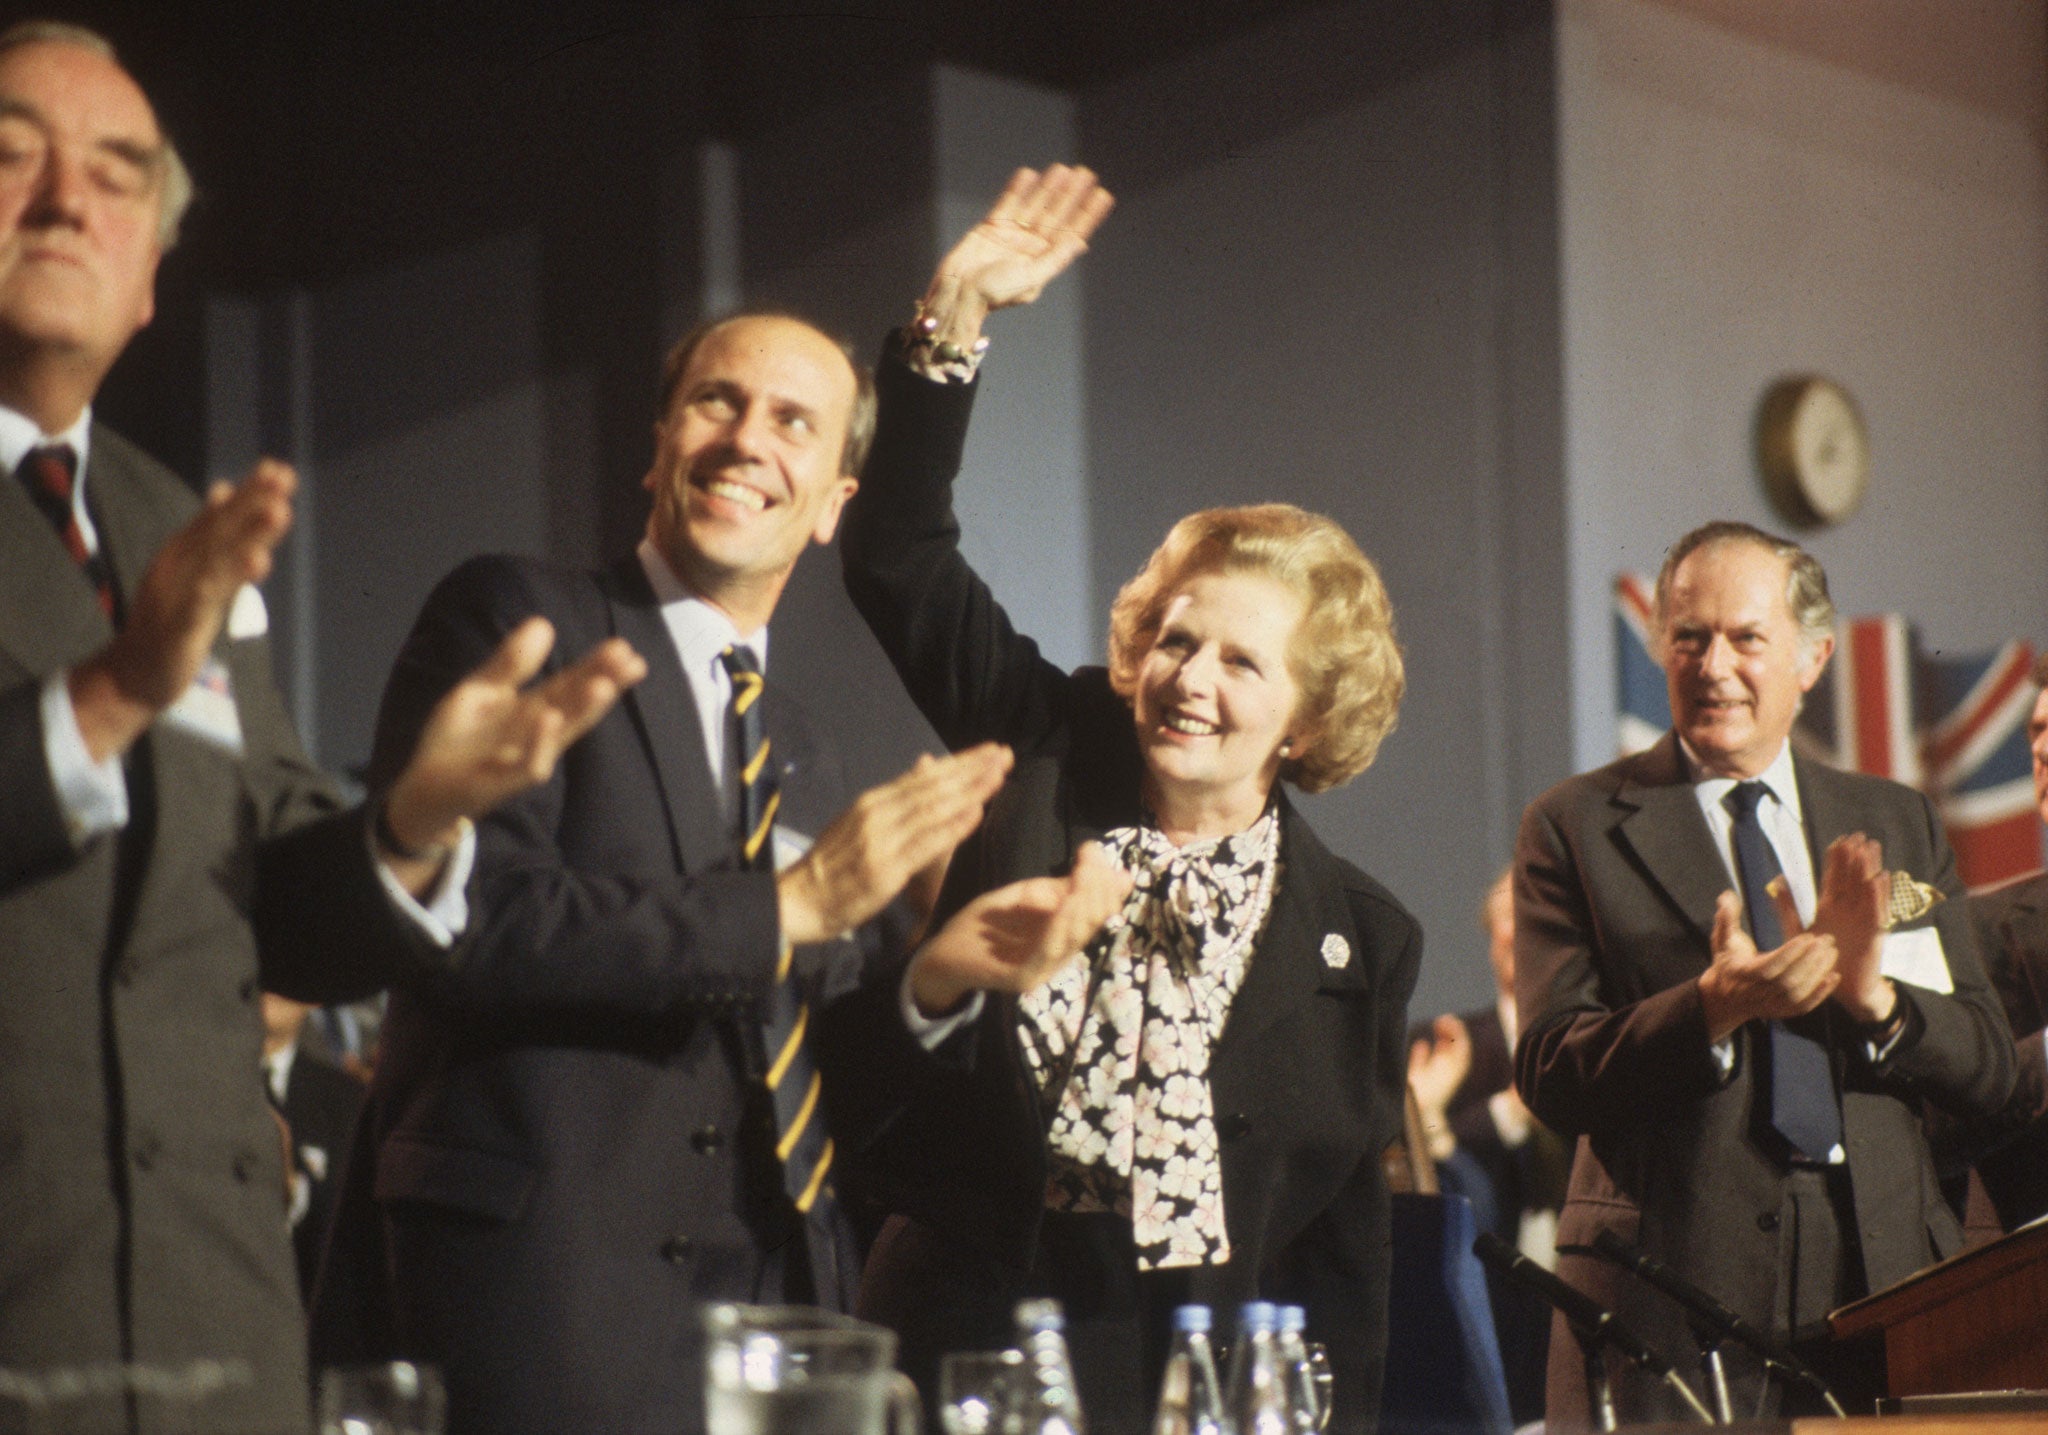 October 1985: Viscount Whitelaw, Norman Tebbit and Margaret Thatcher at the Conservative Party Conference in Blackpool